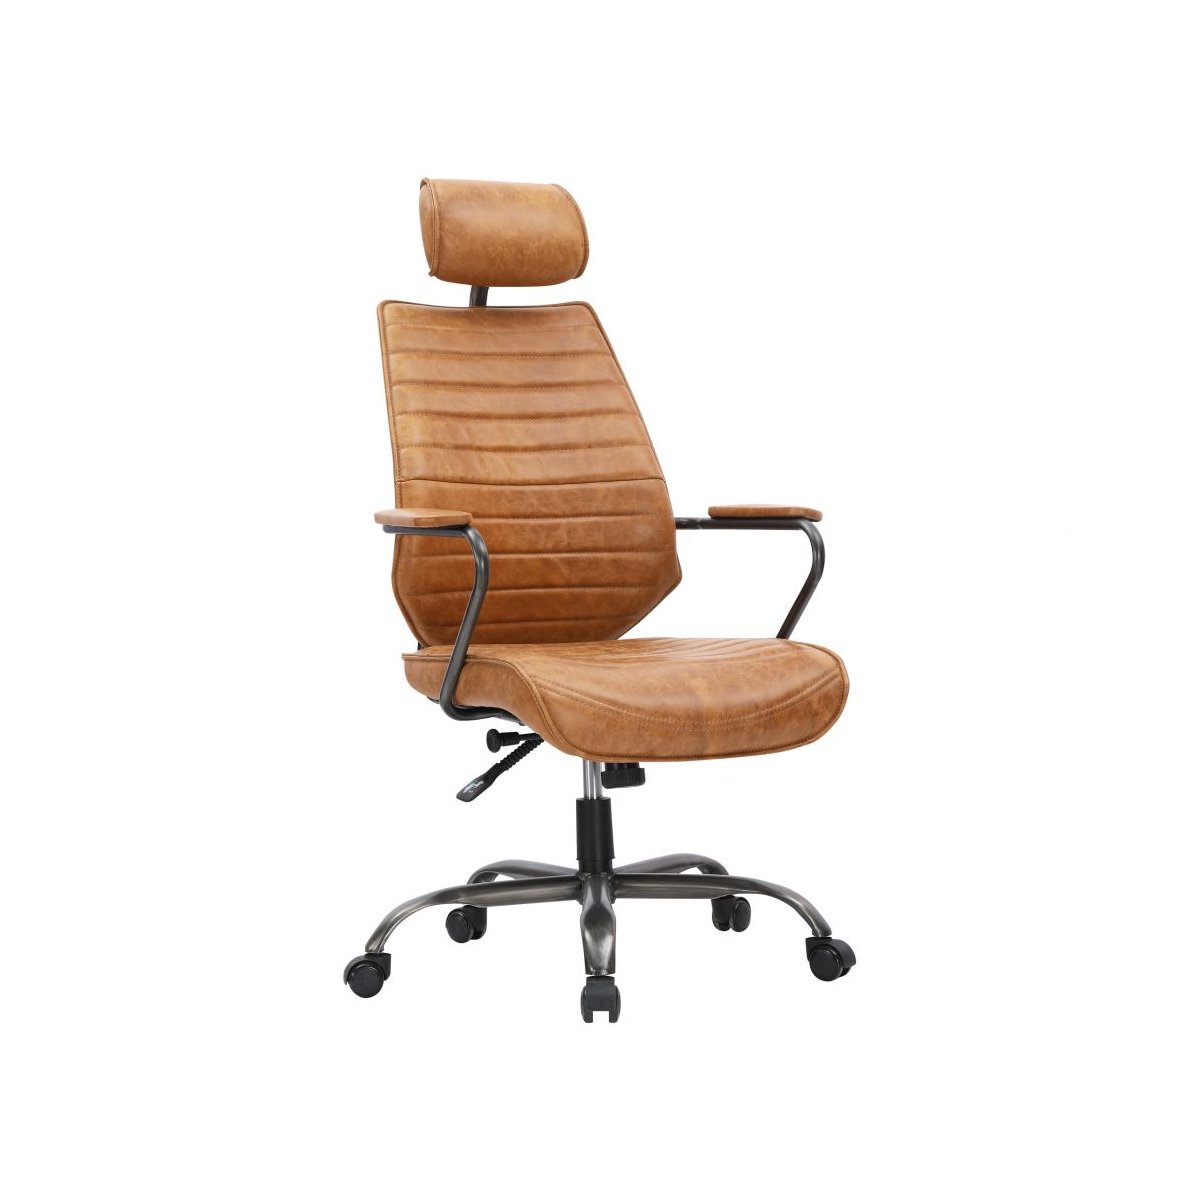 Load image into Gallery viewer, Executive Swivel Office Chair OrangeOffice Chairs Moe&amp;#39;s  Orange   Four Hands, Burke Decor, Mid Century Modern Furniture, Old Bones Furniture Company, Old Bones Co, Modern Mid Century, Designer Furniture, https://www.oldbonesco.com/
